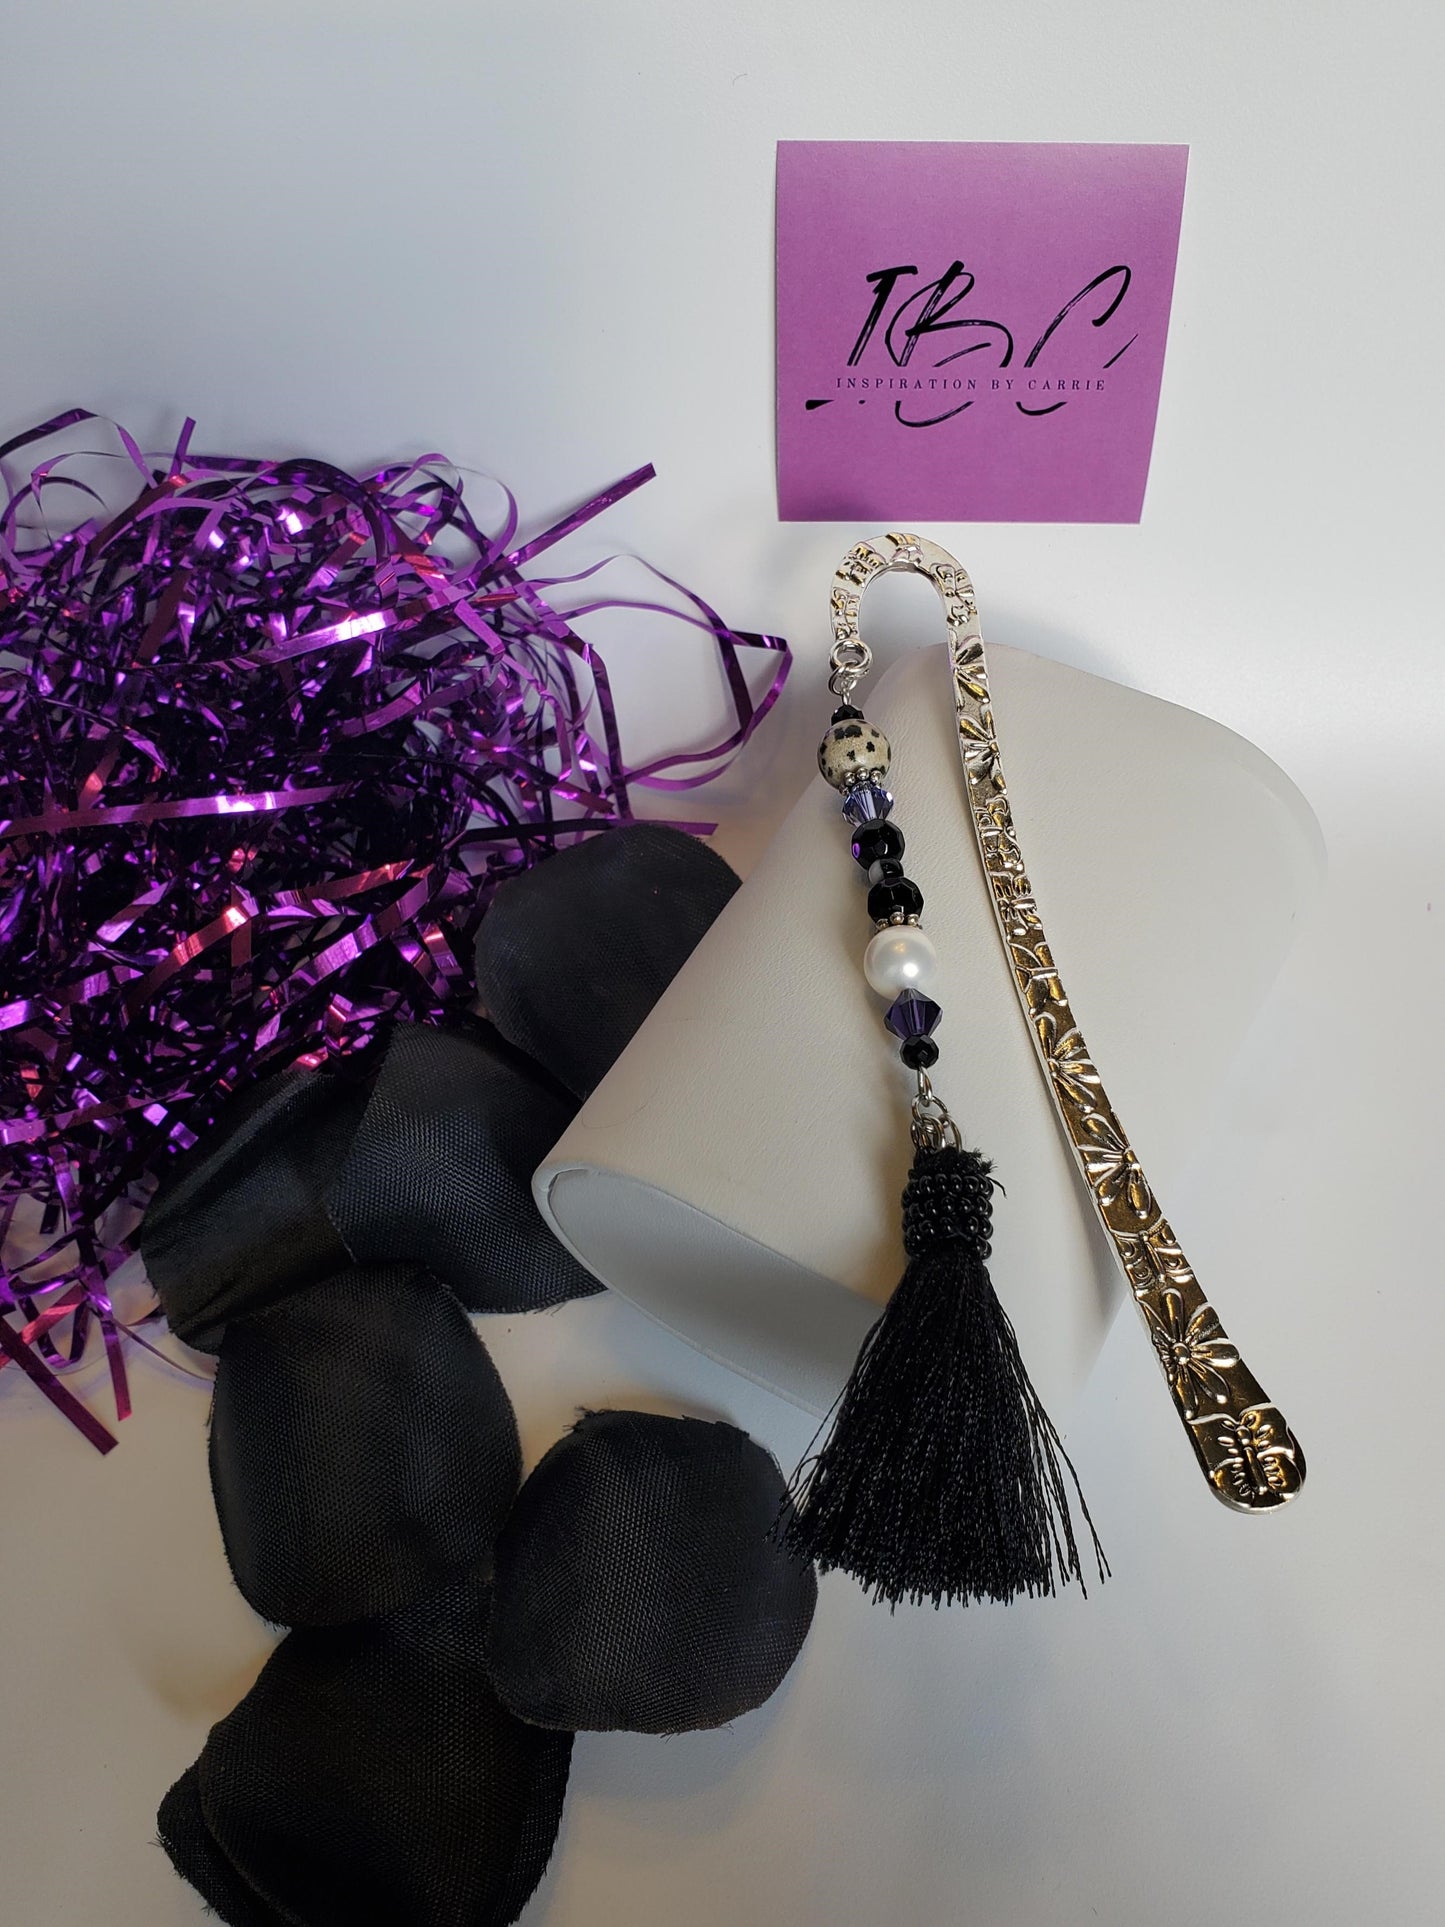 Handcrafted Tassle Beaded Bookmark by Carrie